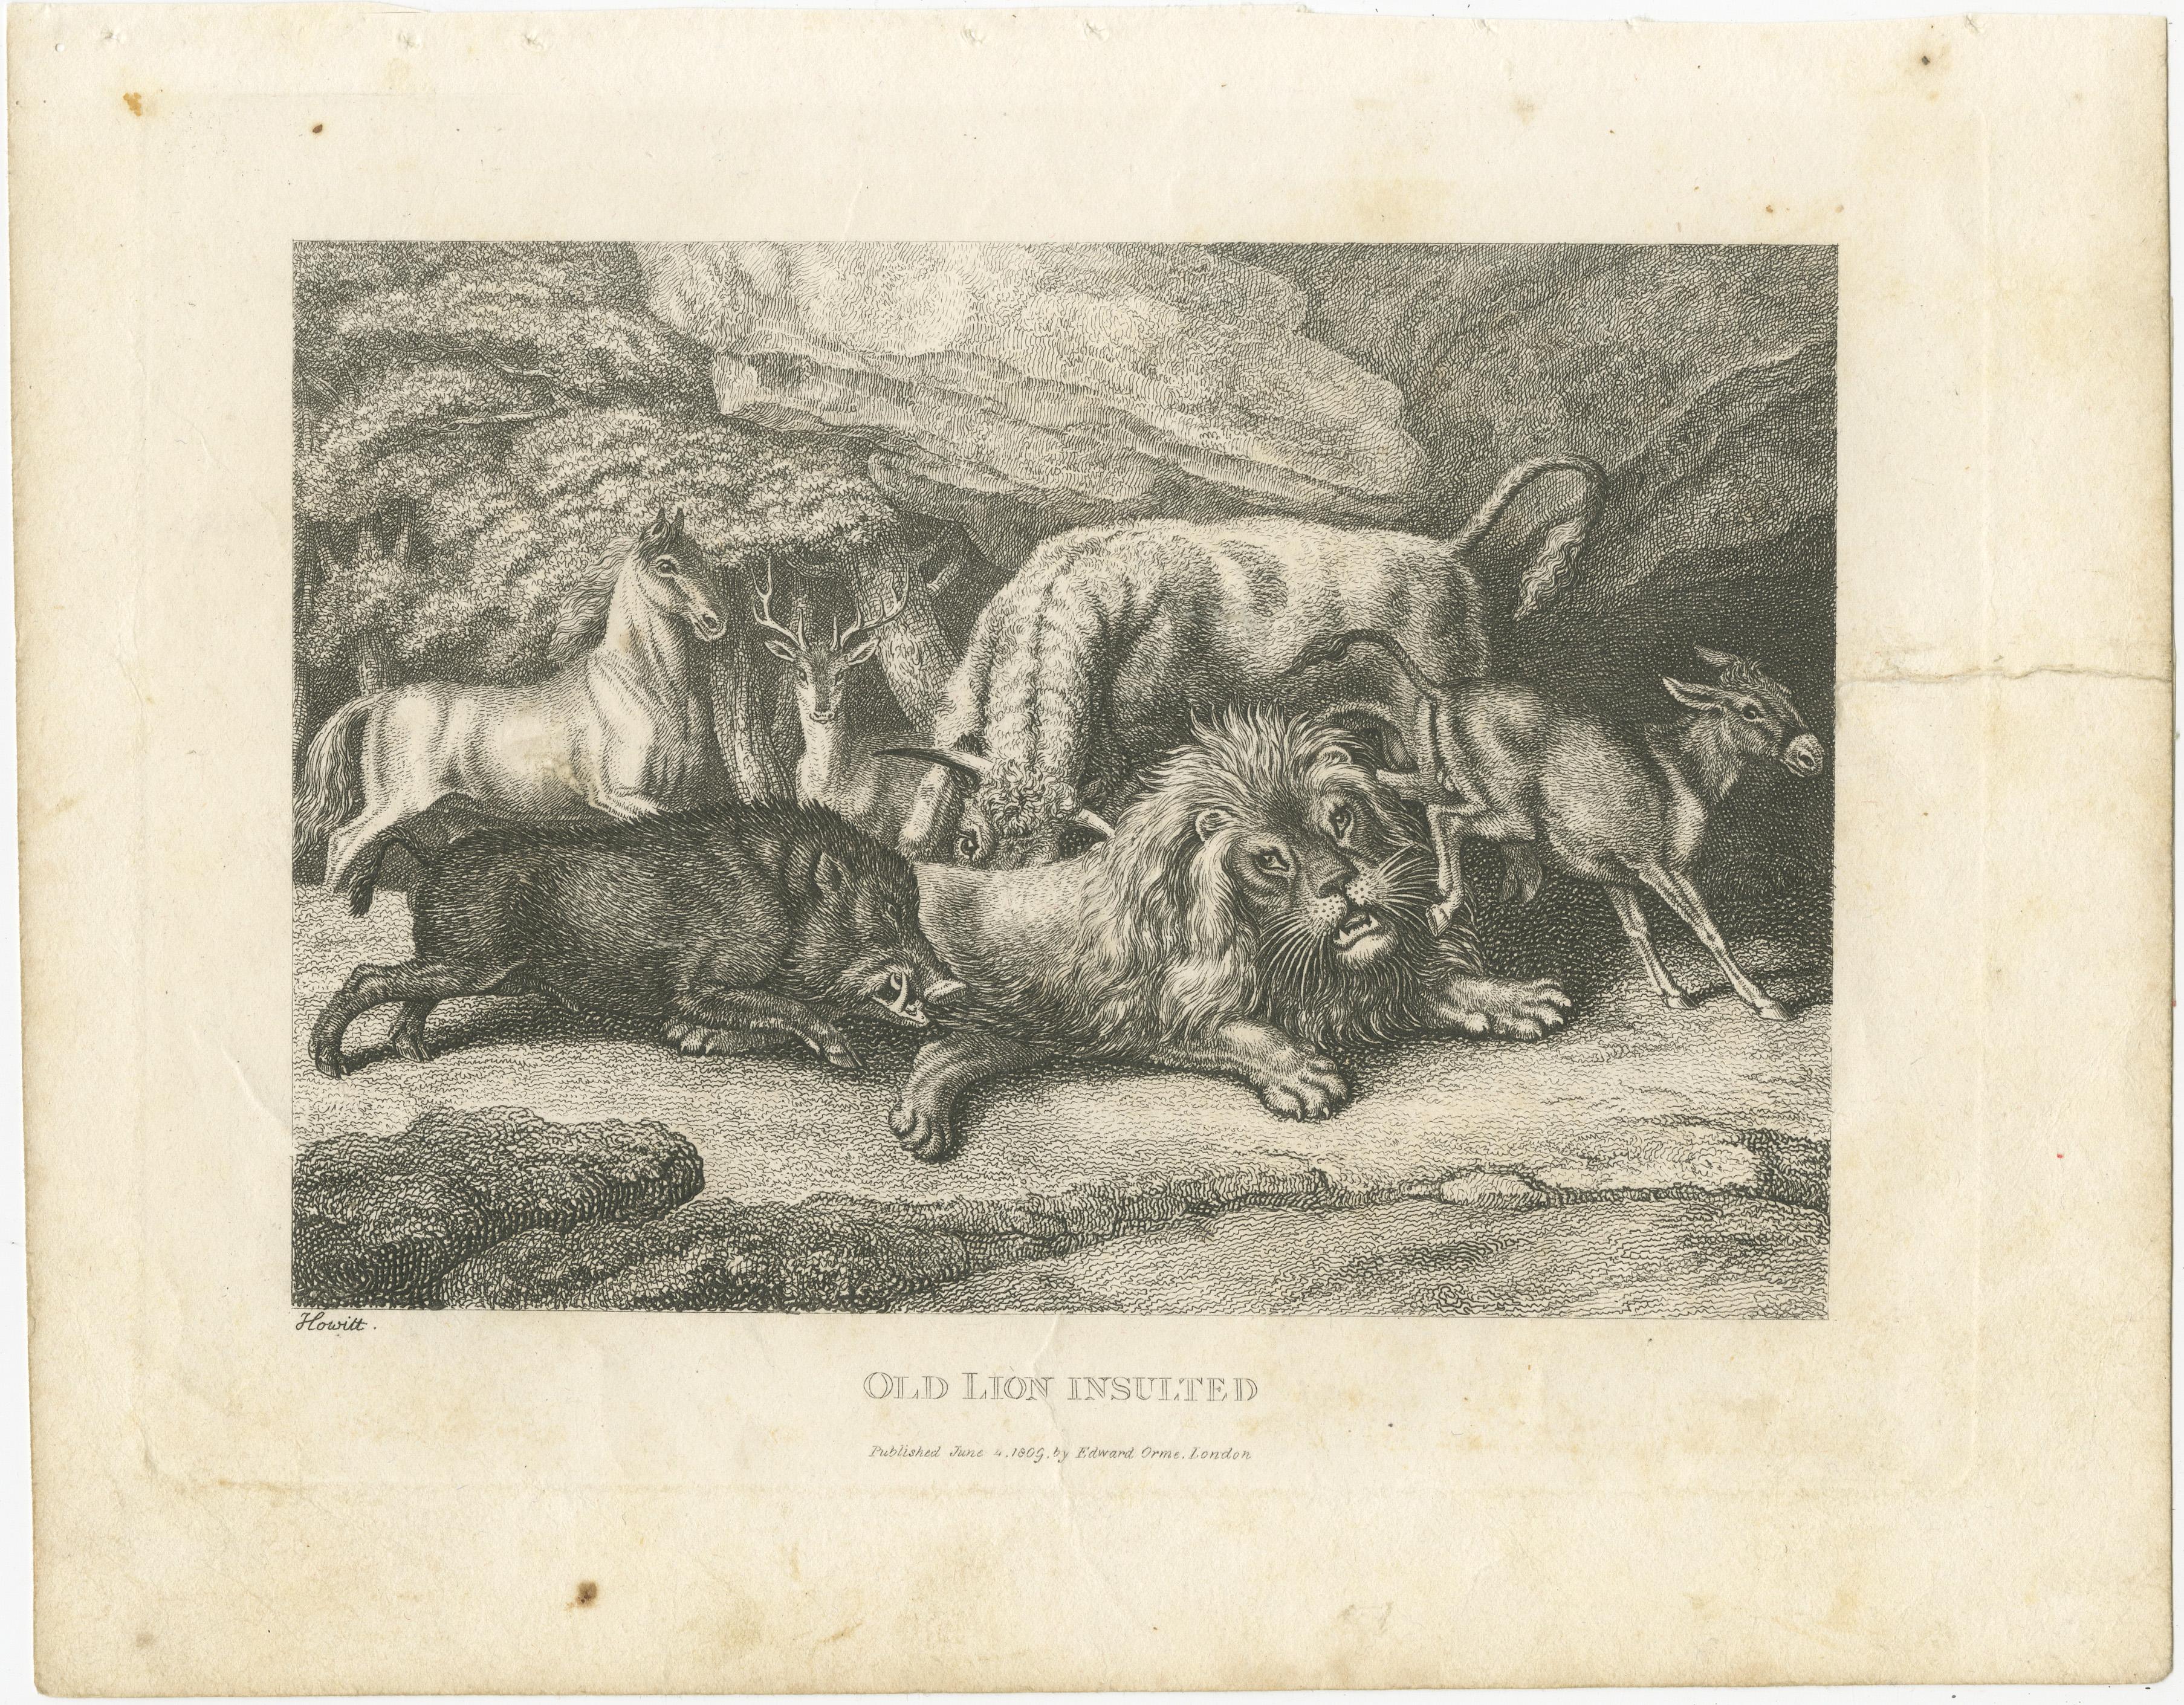 Antique print titled 'Old Lion Insulted'. This print originates from a series depicting fables by Samuel Howitt. Samuel Howitt was an English painter, illustrator and etcher of animals, hunting, horse-racing and landscape scenes. He worked in both